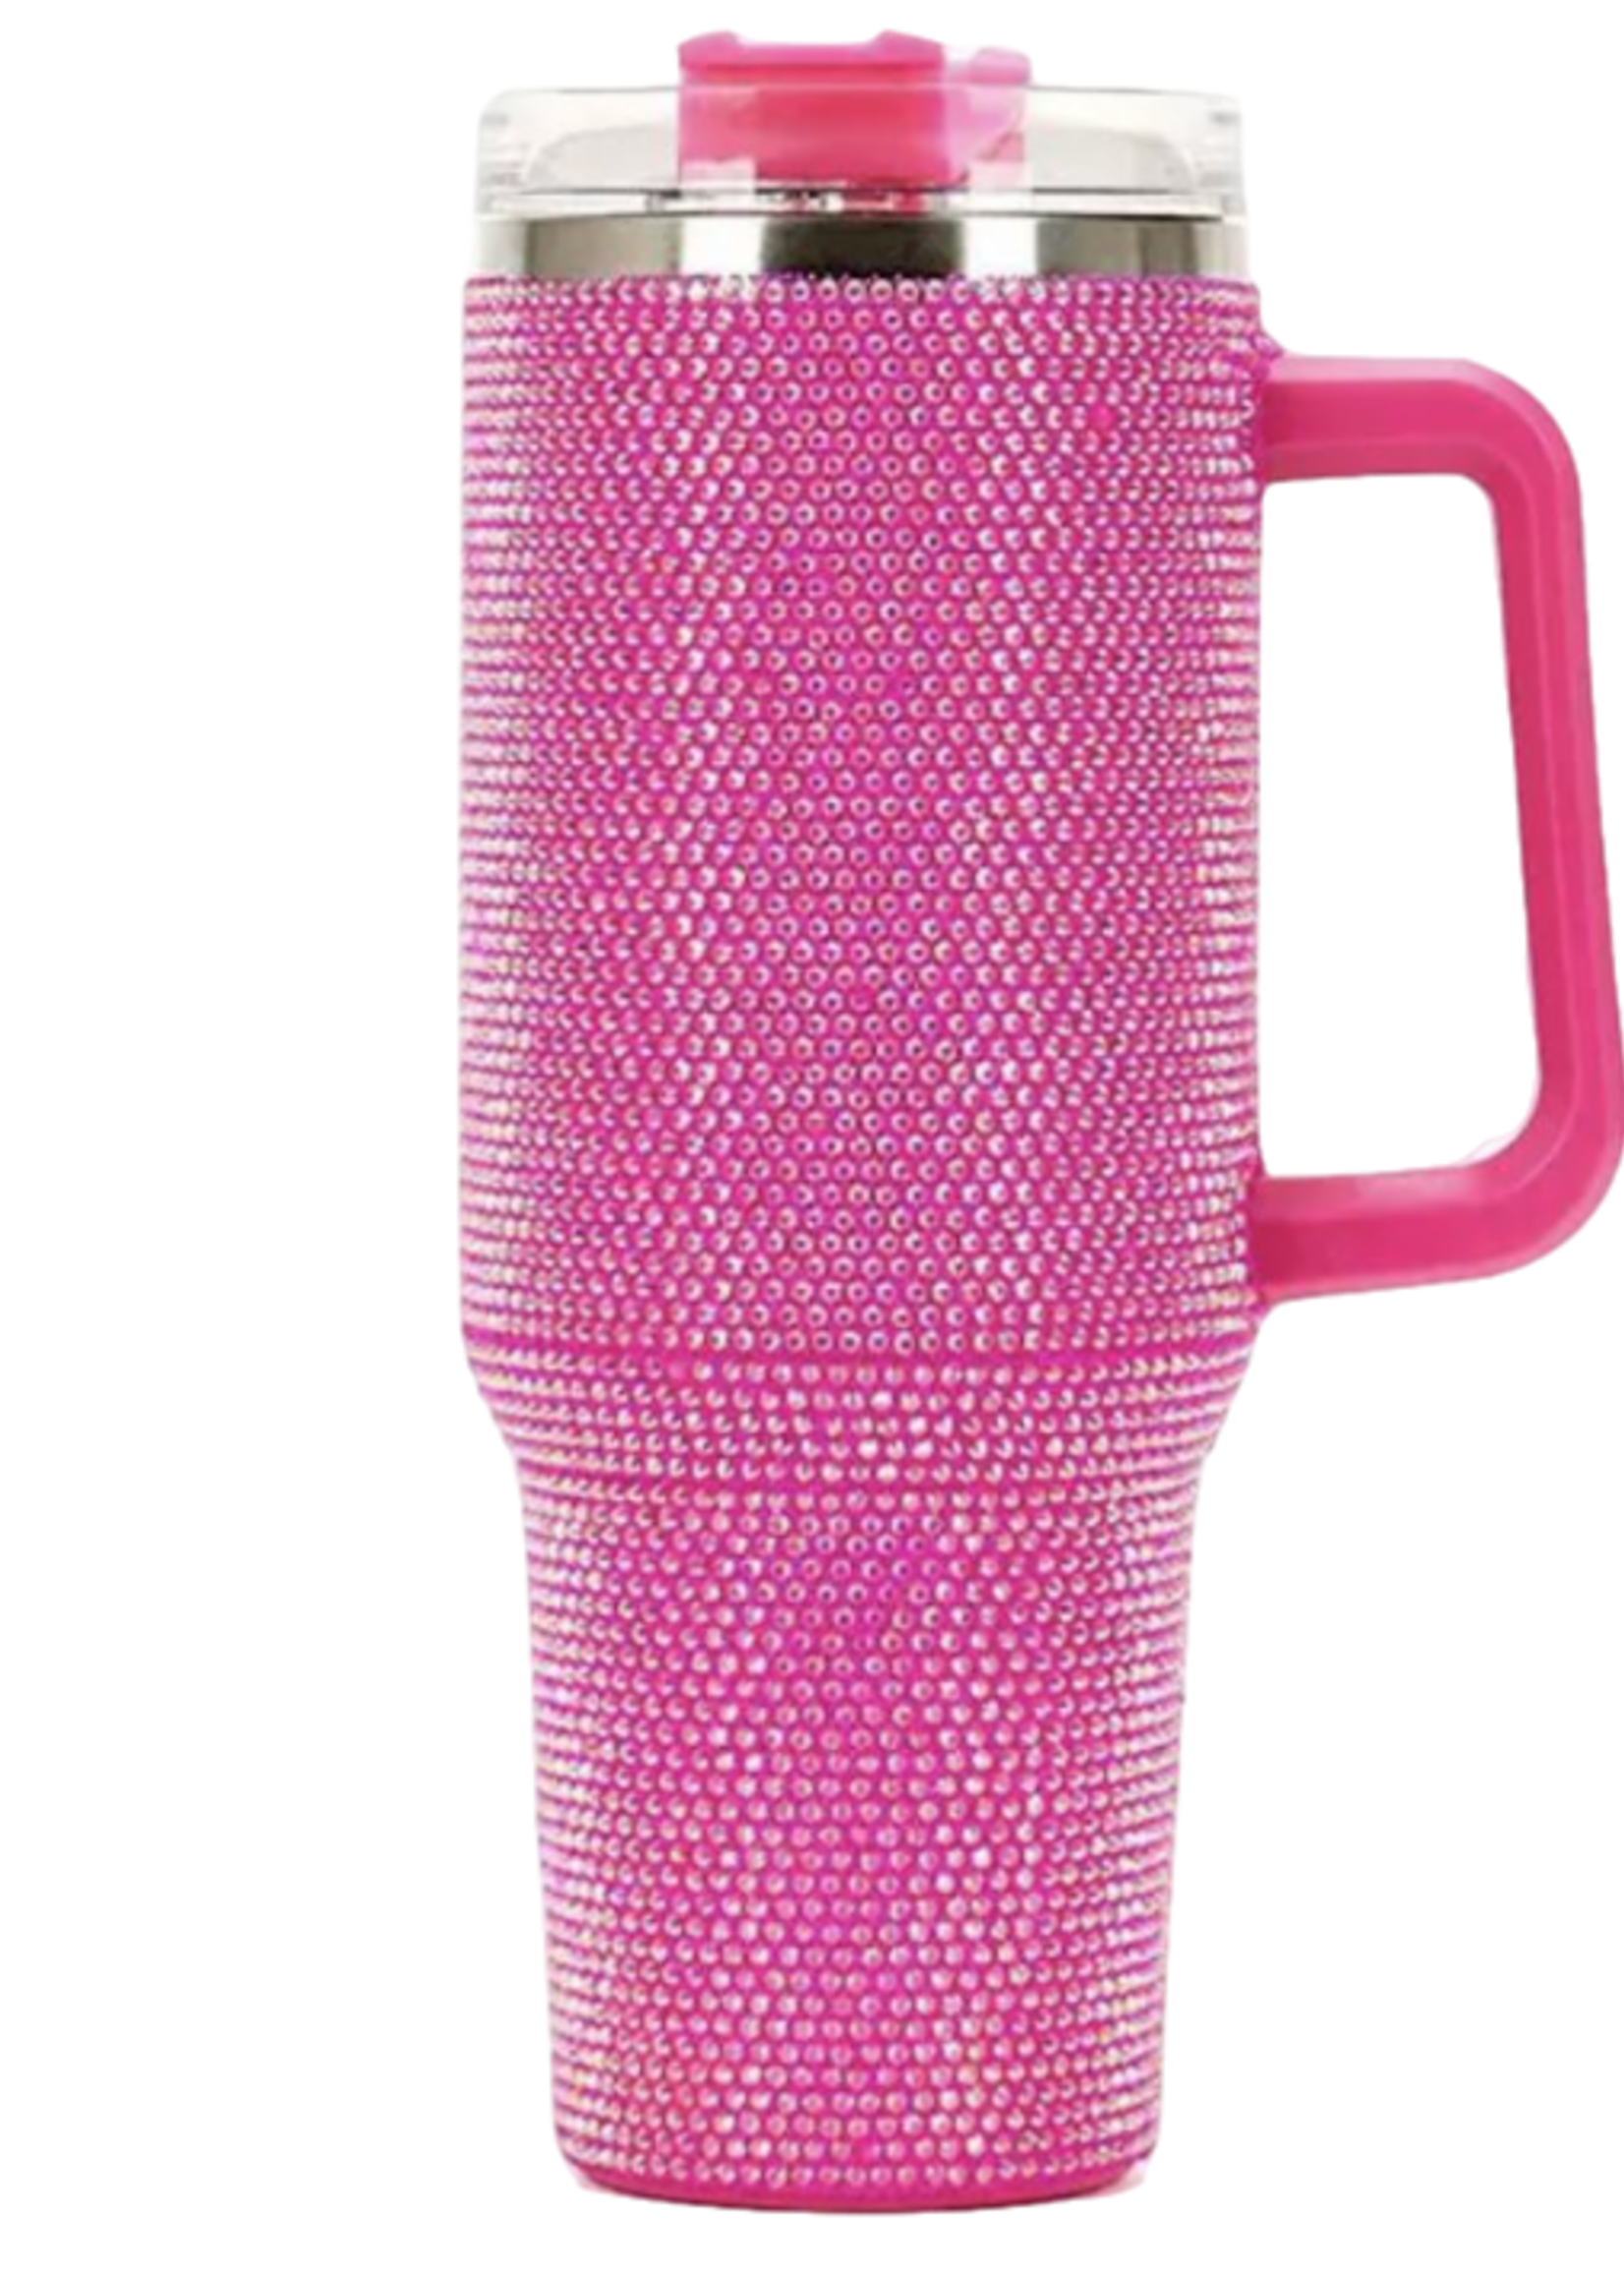 Bedazzled Tumblers